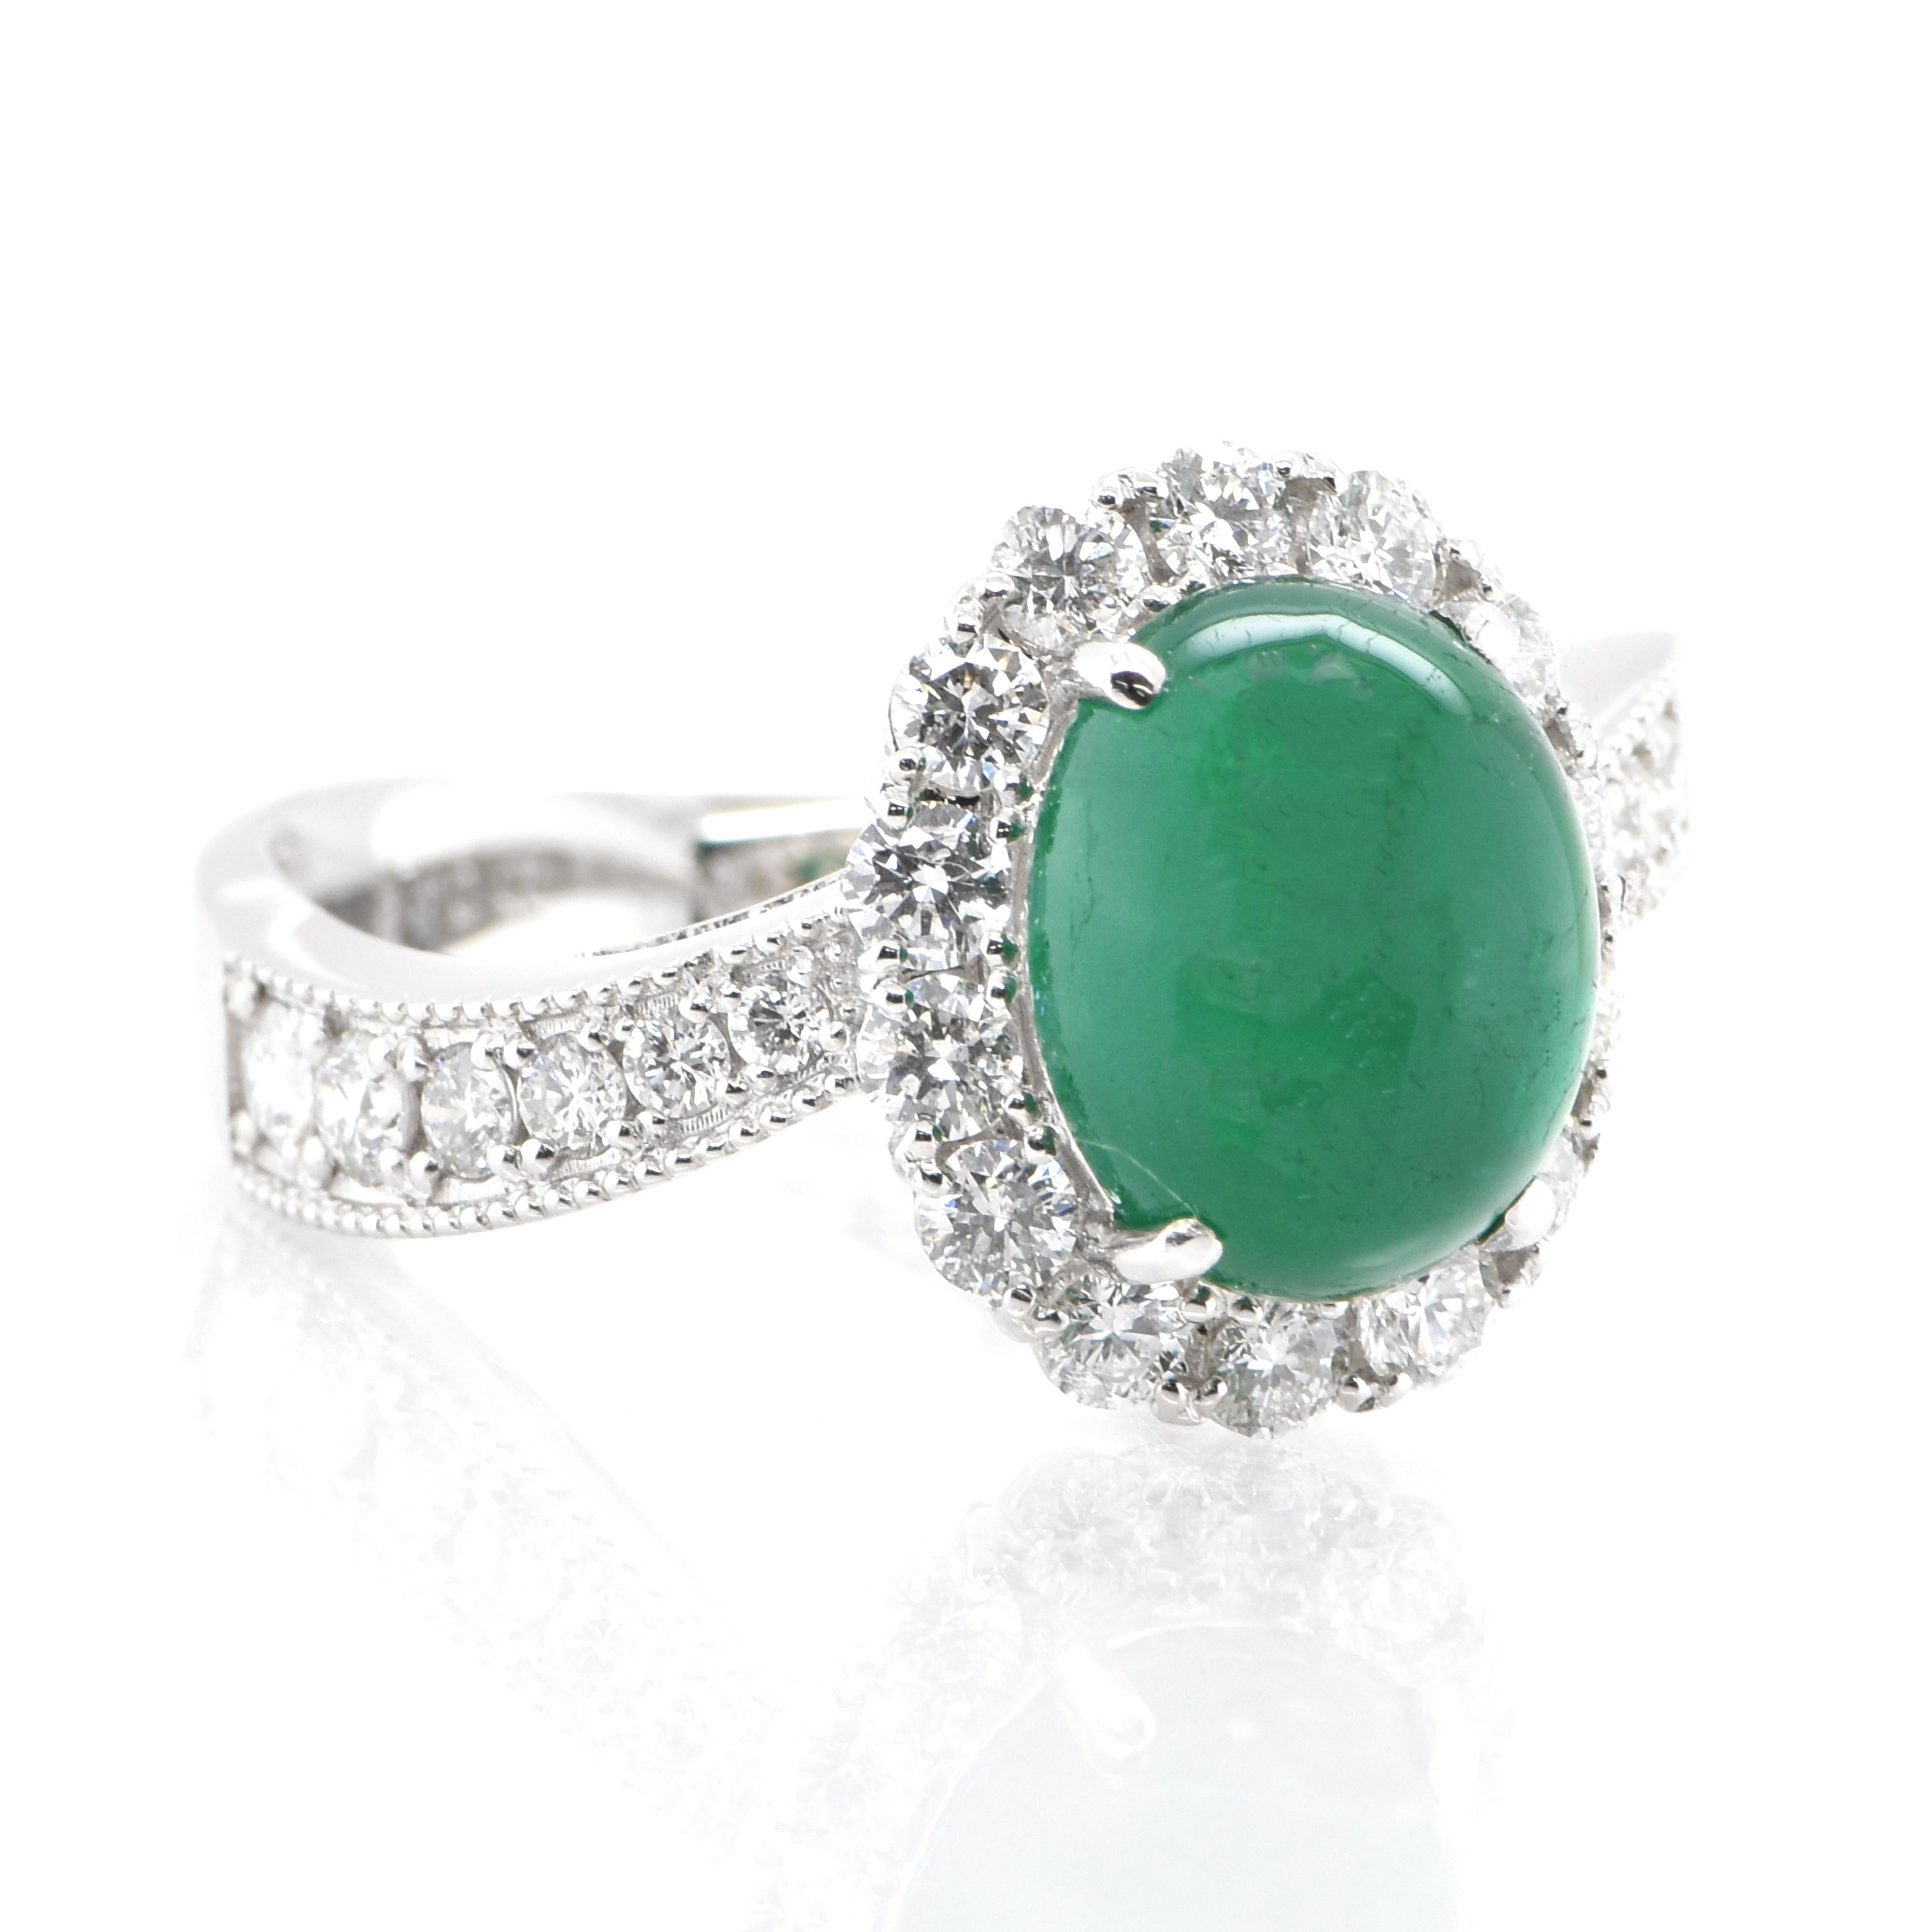 Modern 2.70 Carat Natural Emerald Cabochon and Diamond Ring Set in Platinum For Sale